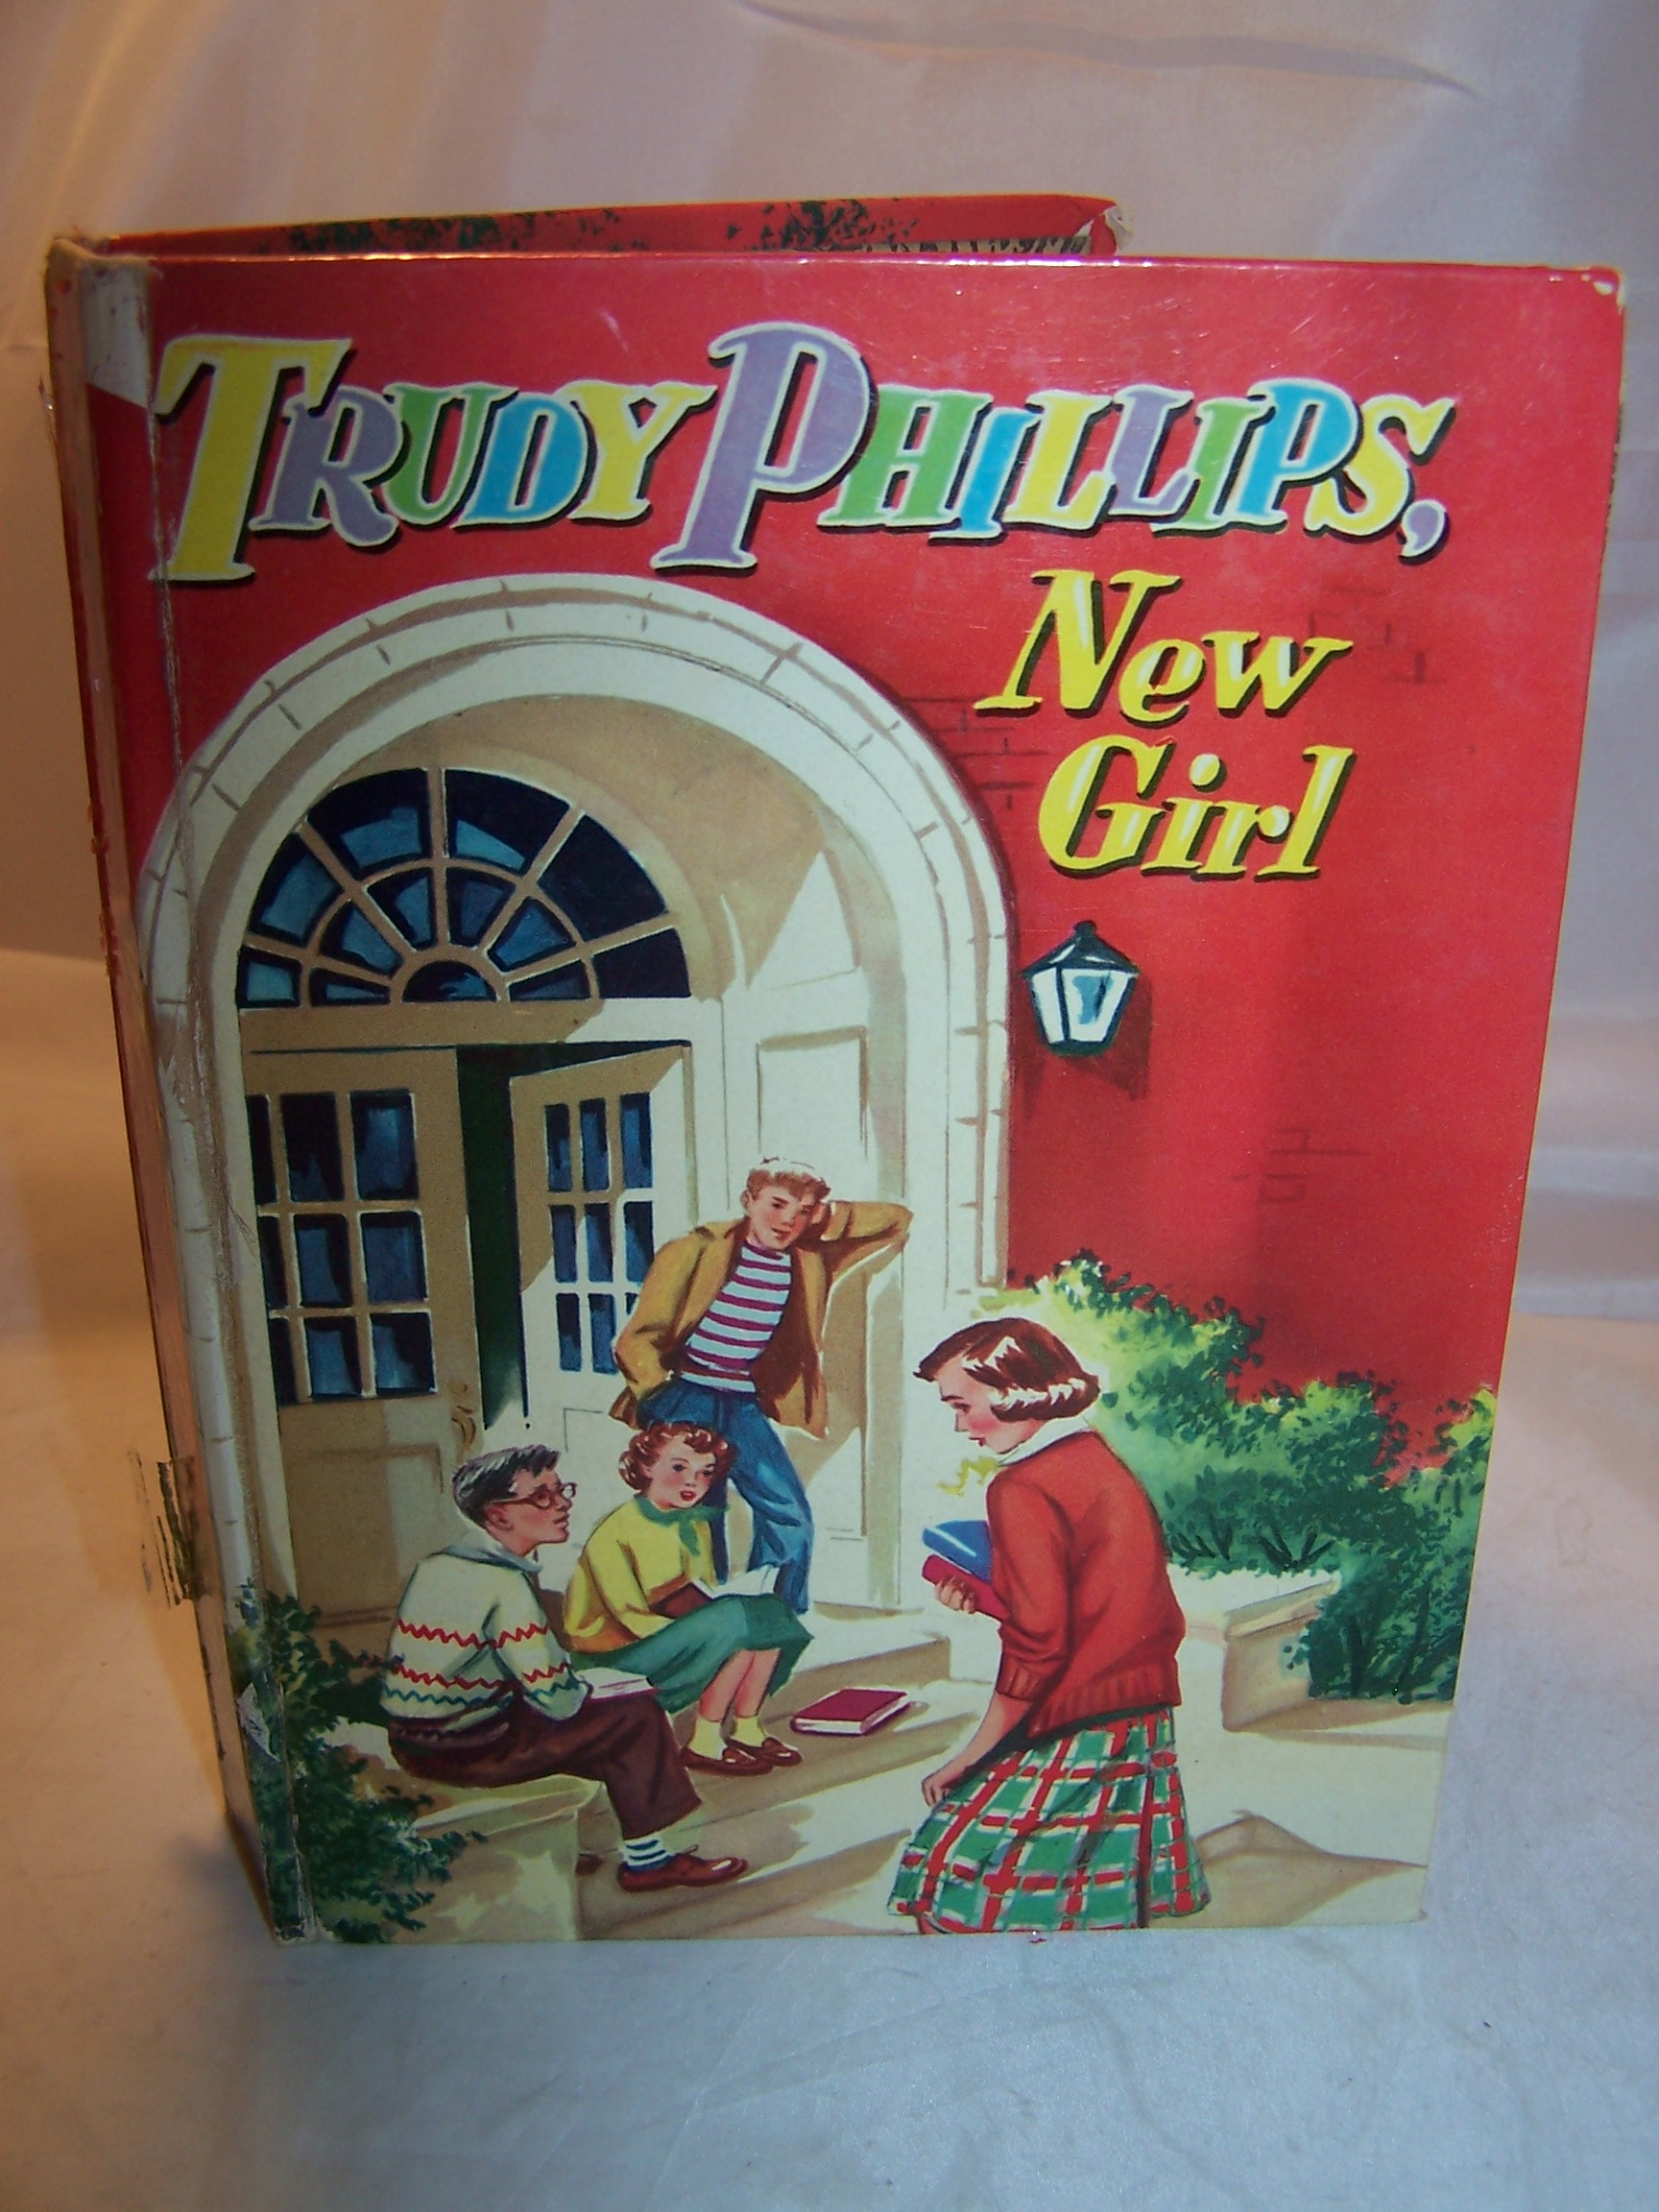 Trudy Phillips, New Girl, Barbara Bates, First Edition